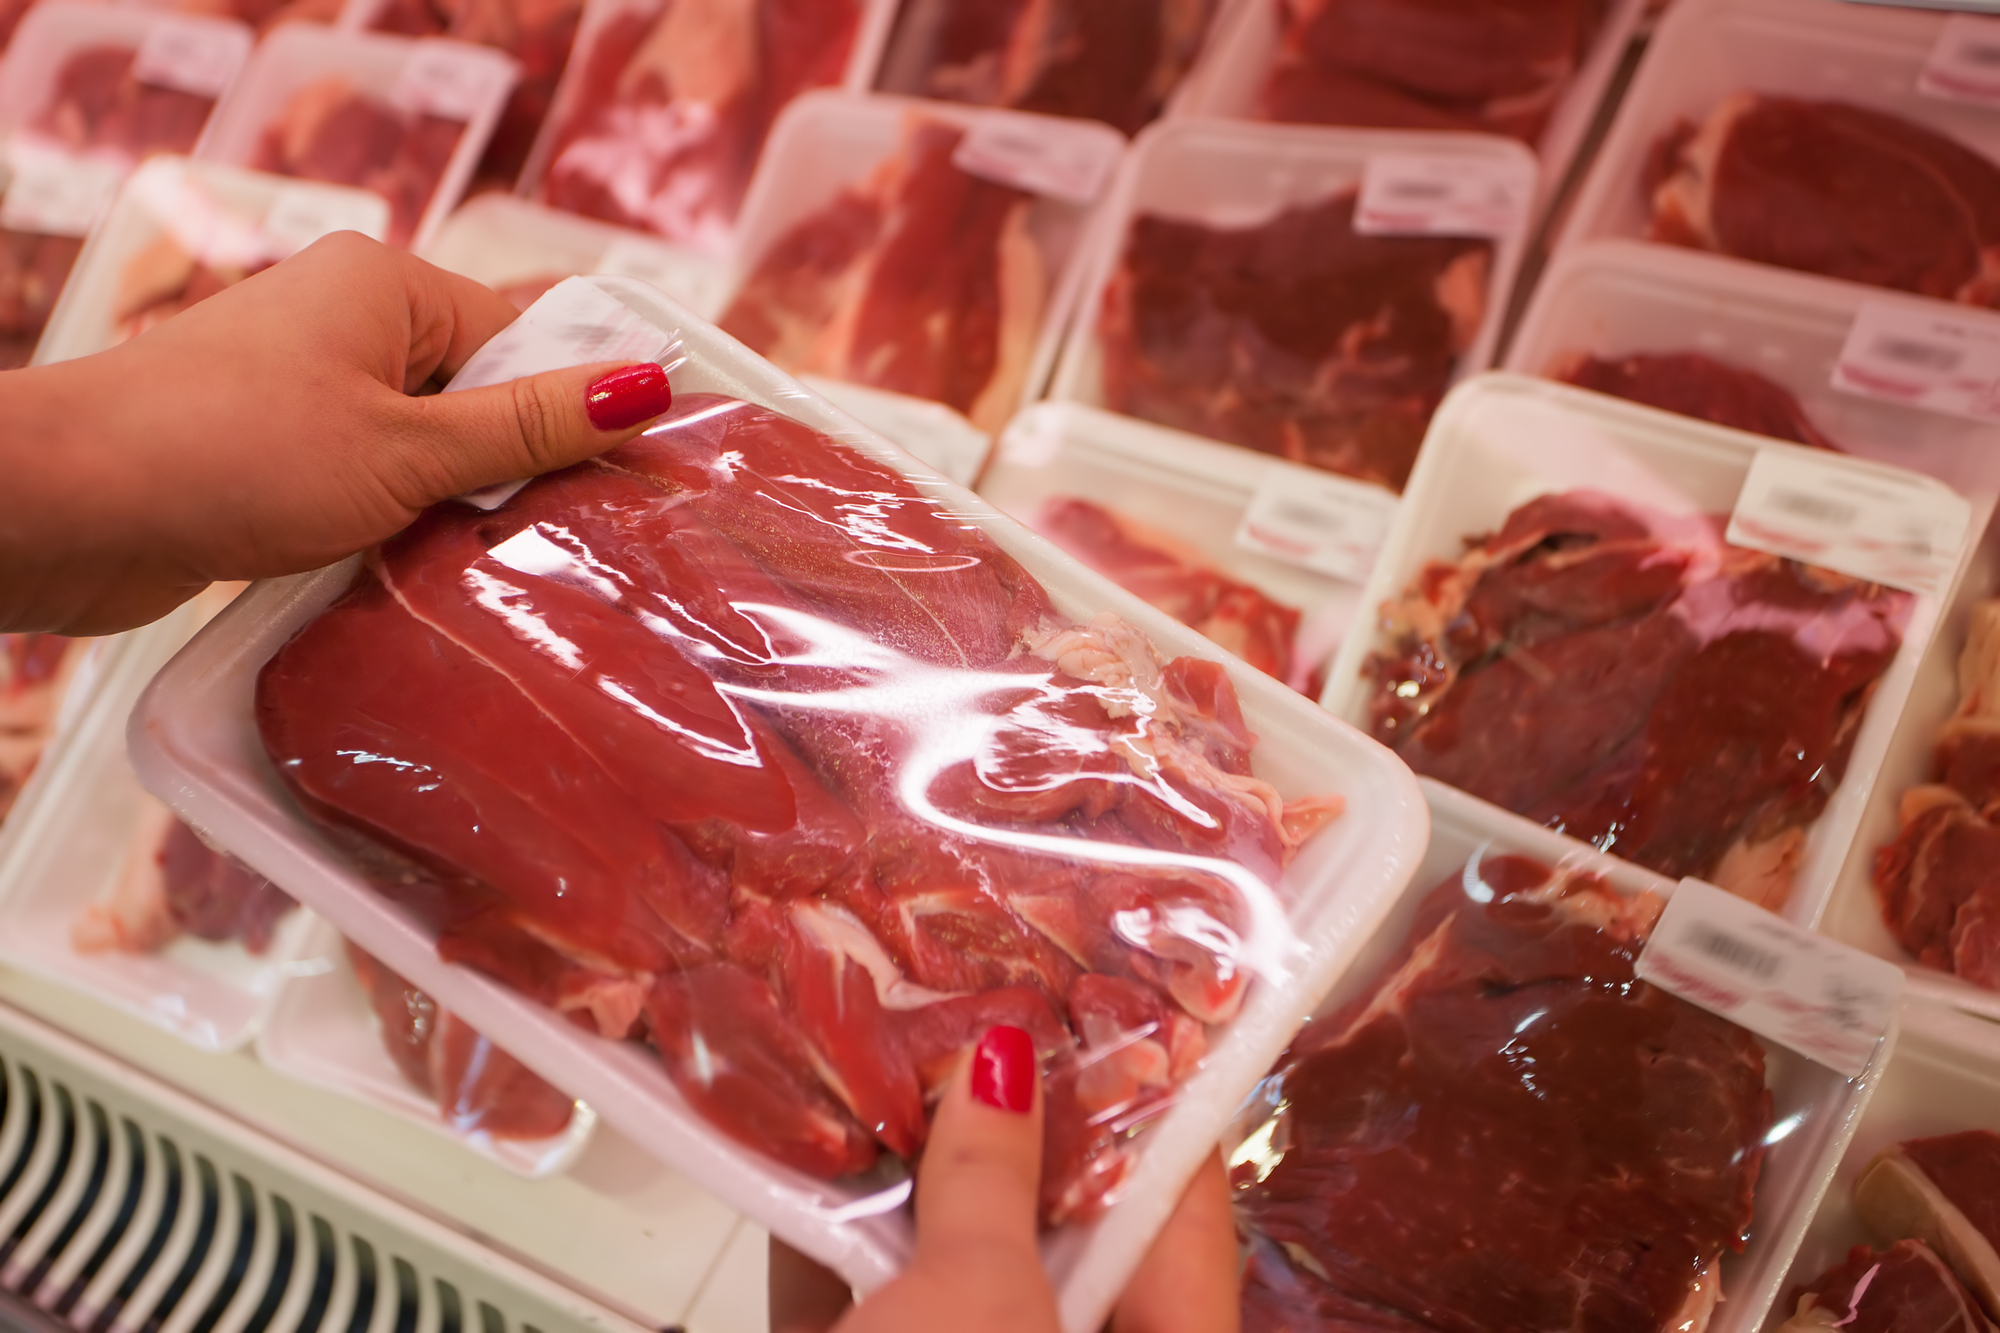 This Supermarket Just Added GPS Trackers to Meat Packages Due to Theft and I Have So Many Questions